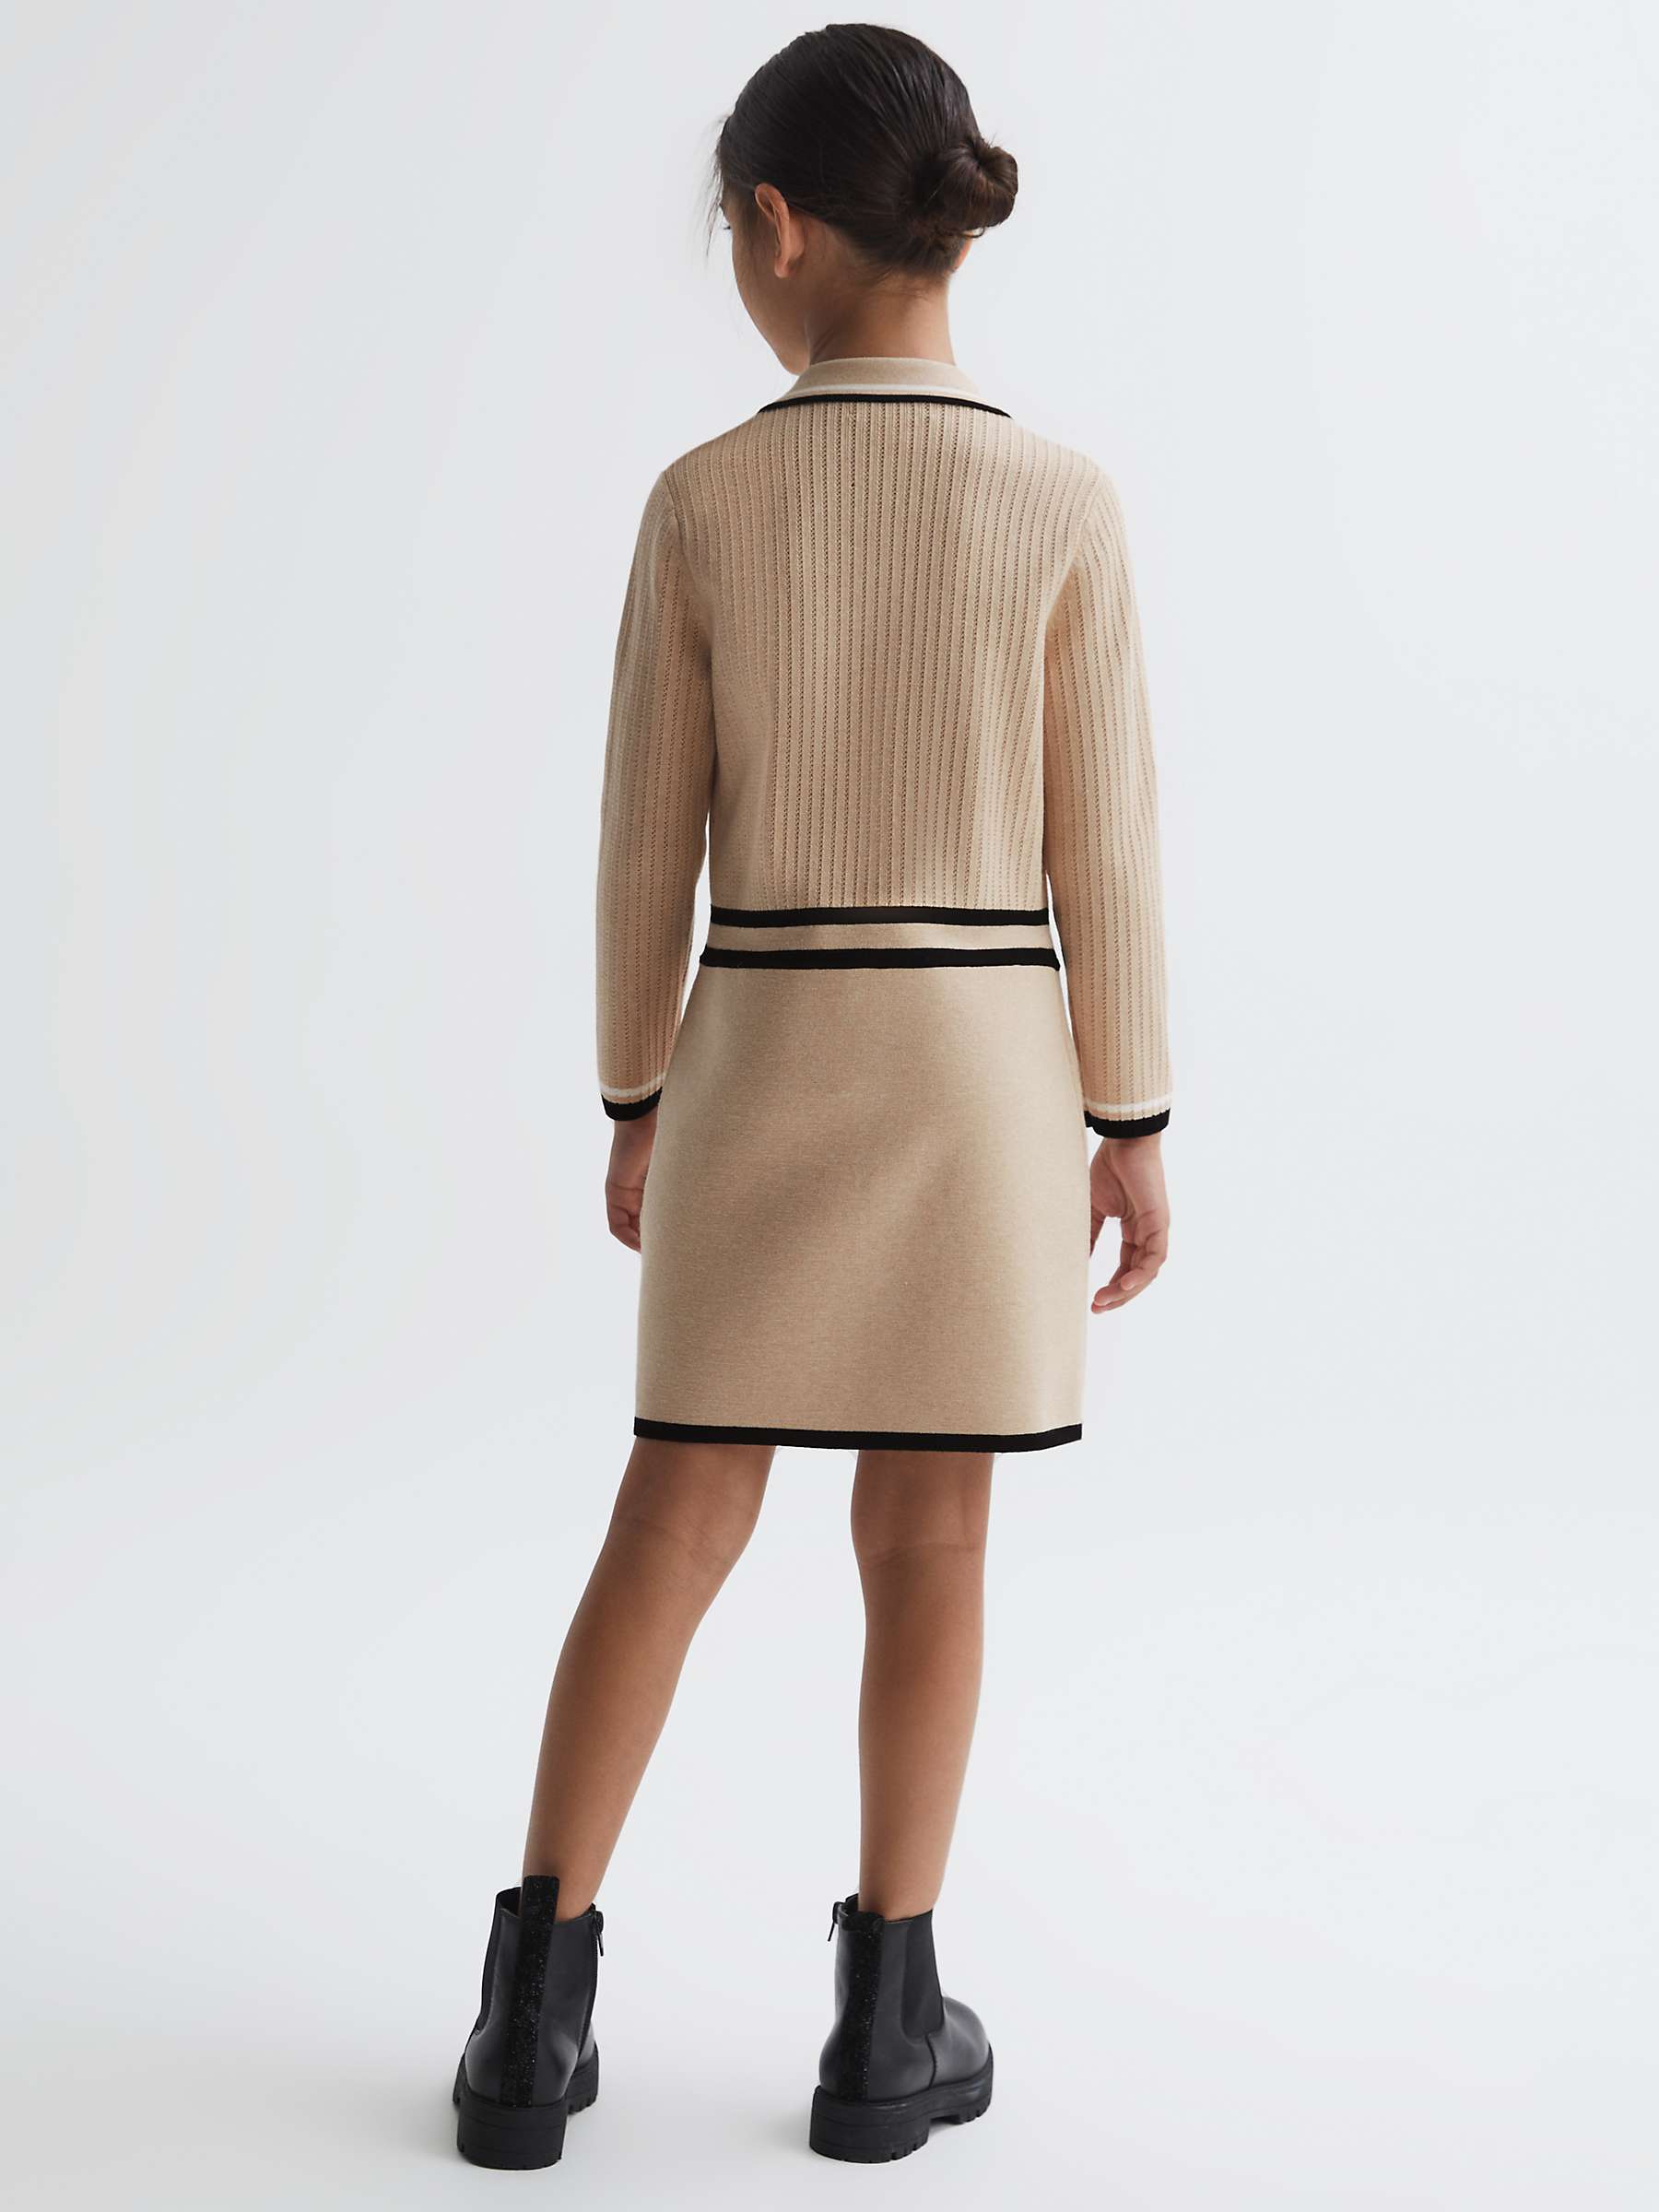 Buy Reiss Kids' Ruby Knitted Polo Dress Online at johnlewis.com